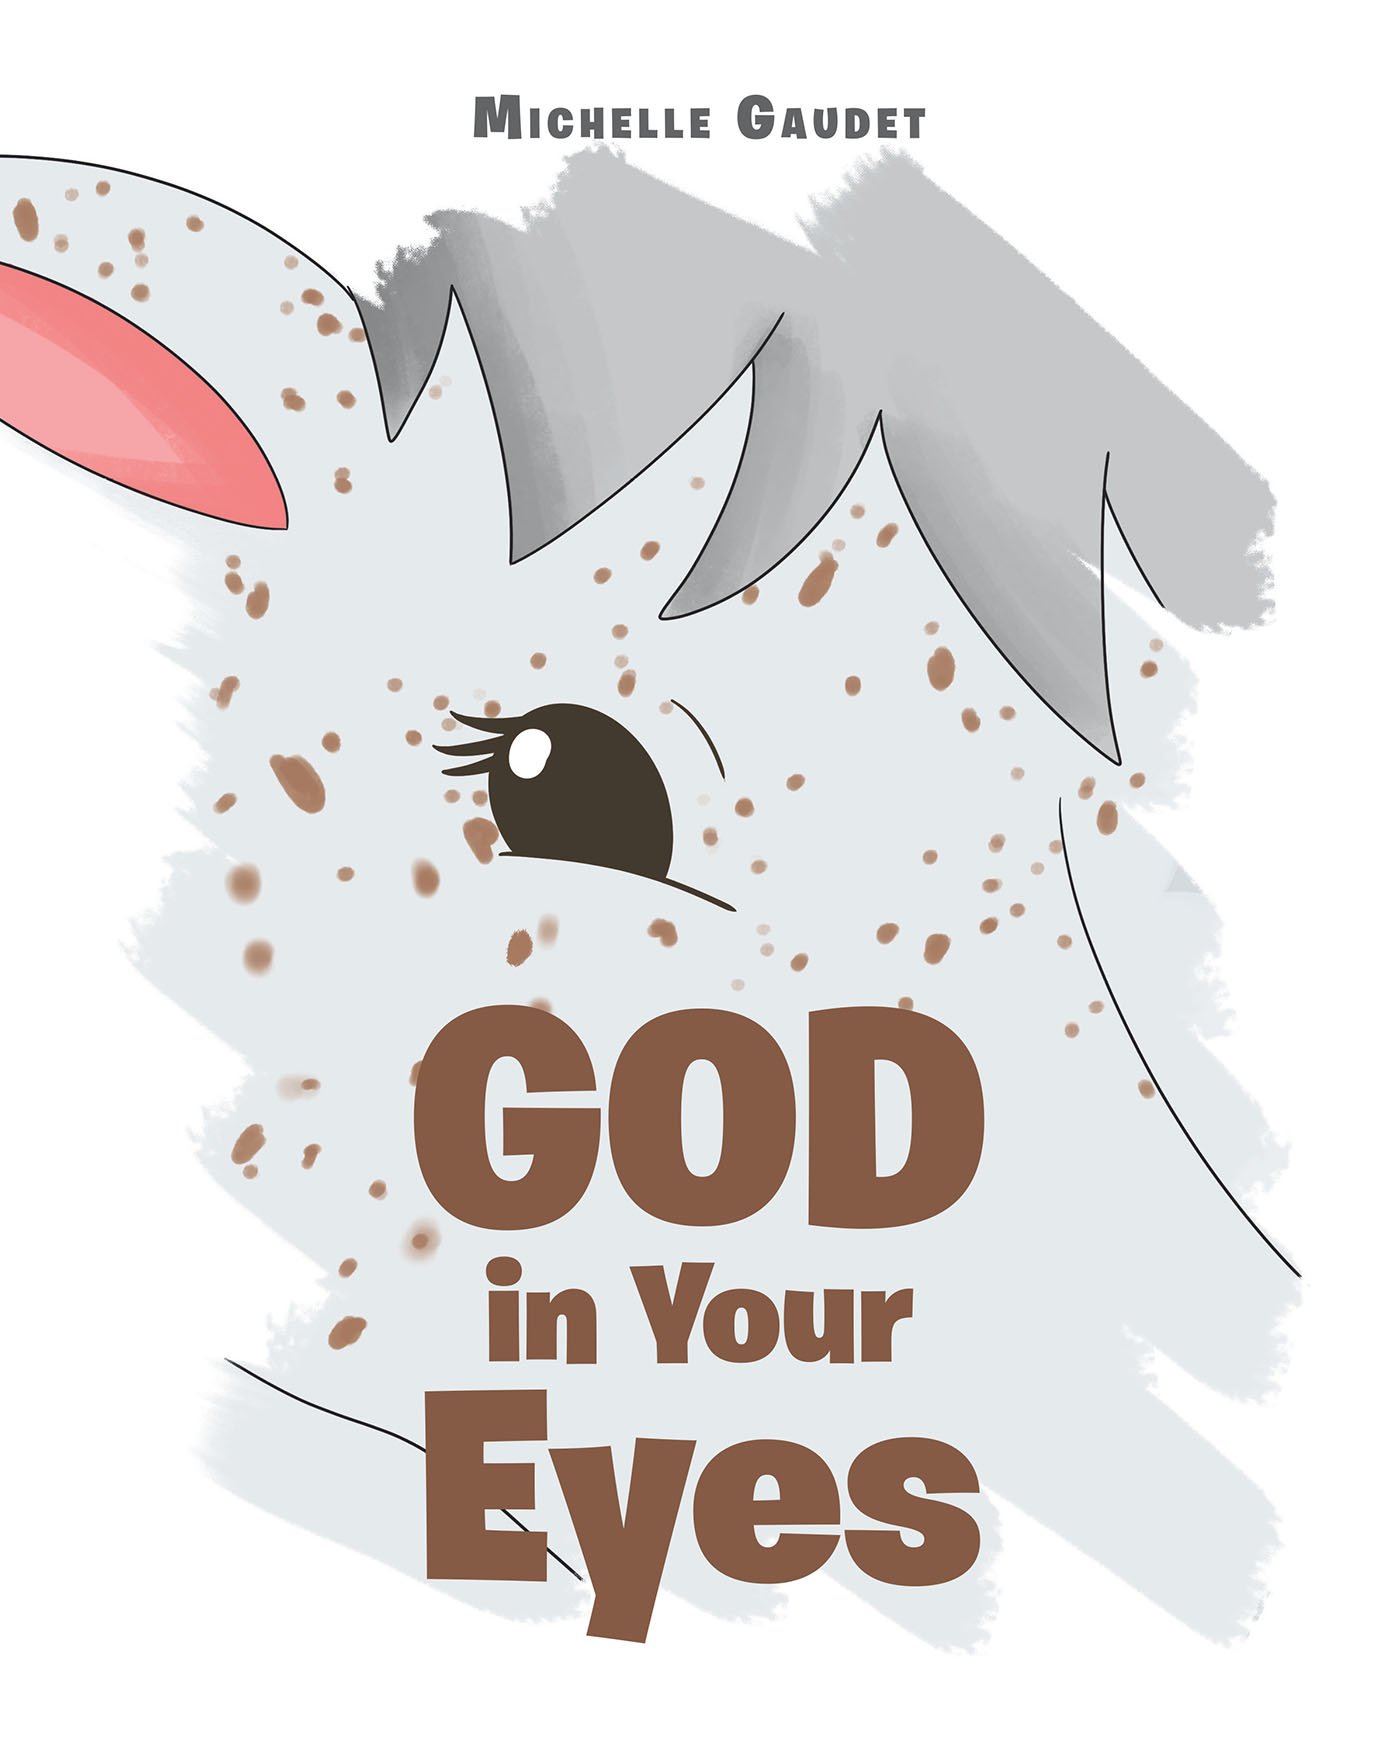 Michelle Gaudet’s Newly Released “God In Your Eyes” is a Sweet Story of the Bond Between a Young Girl and a Beloved Horse